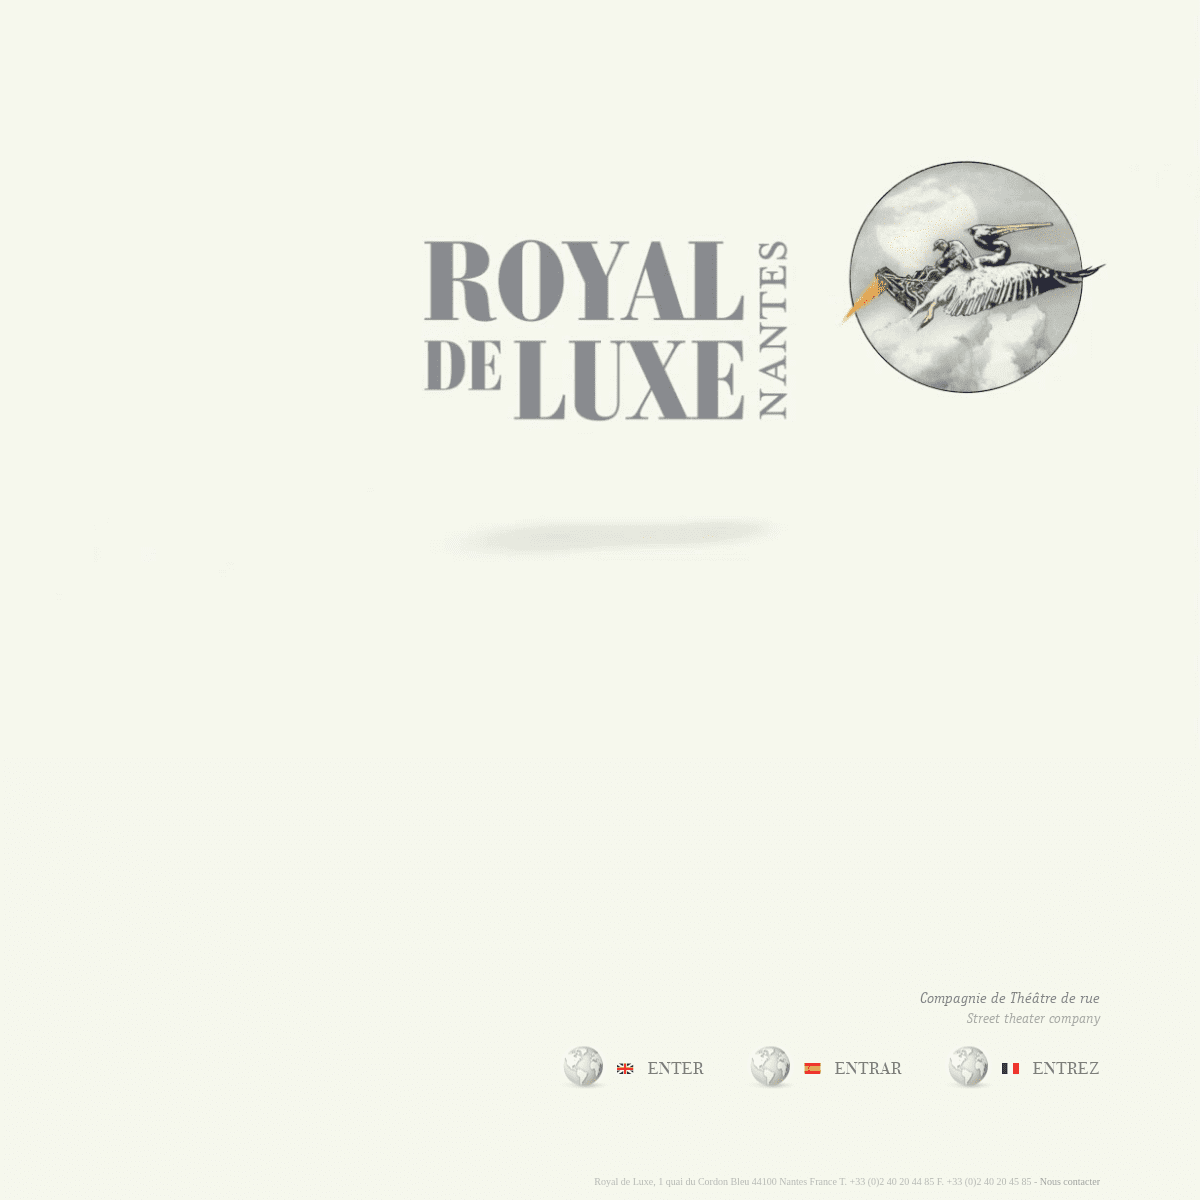 A complete backup of https://royal-de-luxe.com